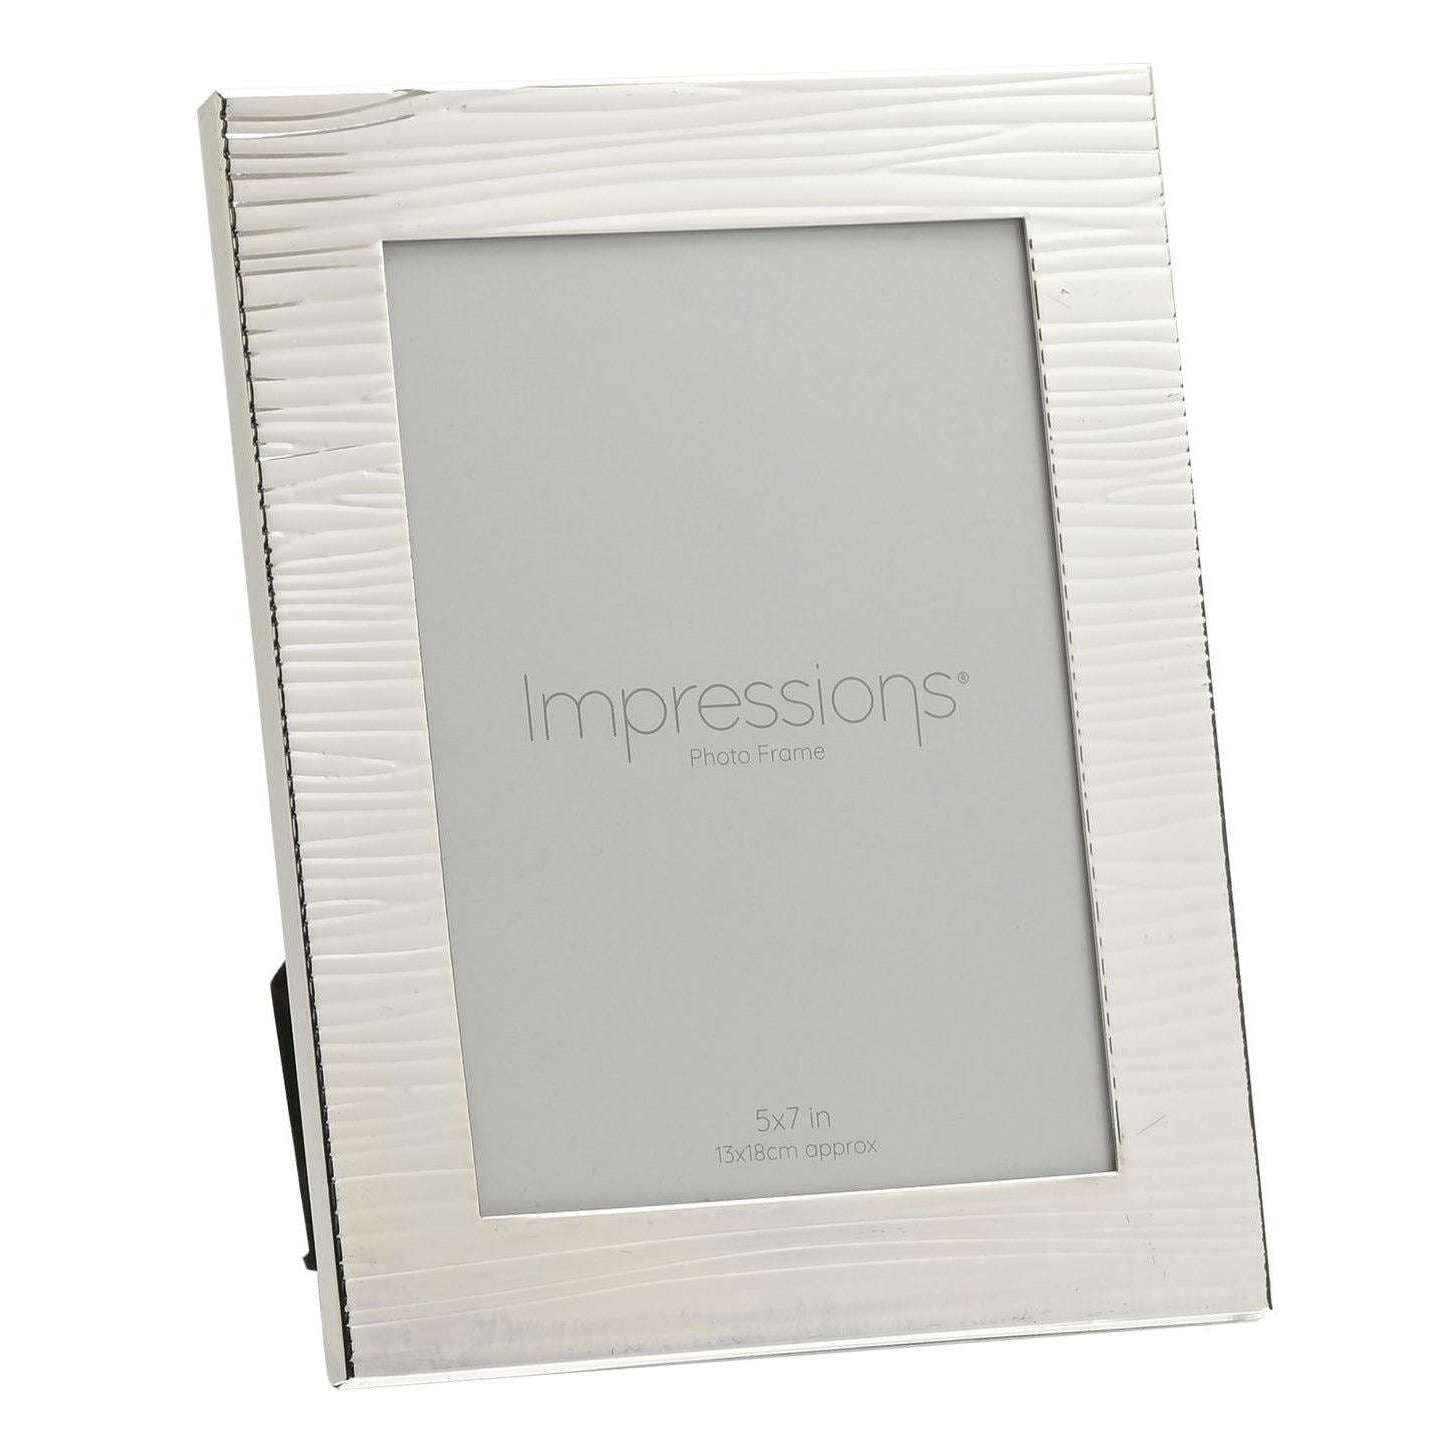 Juliana Impressions Ripple Texture Silver Plated Frame 5 x 7 - Silver/White